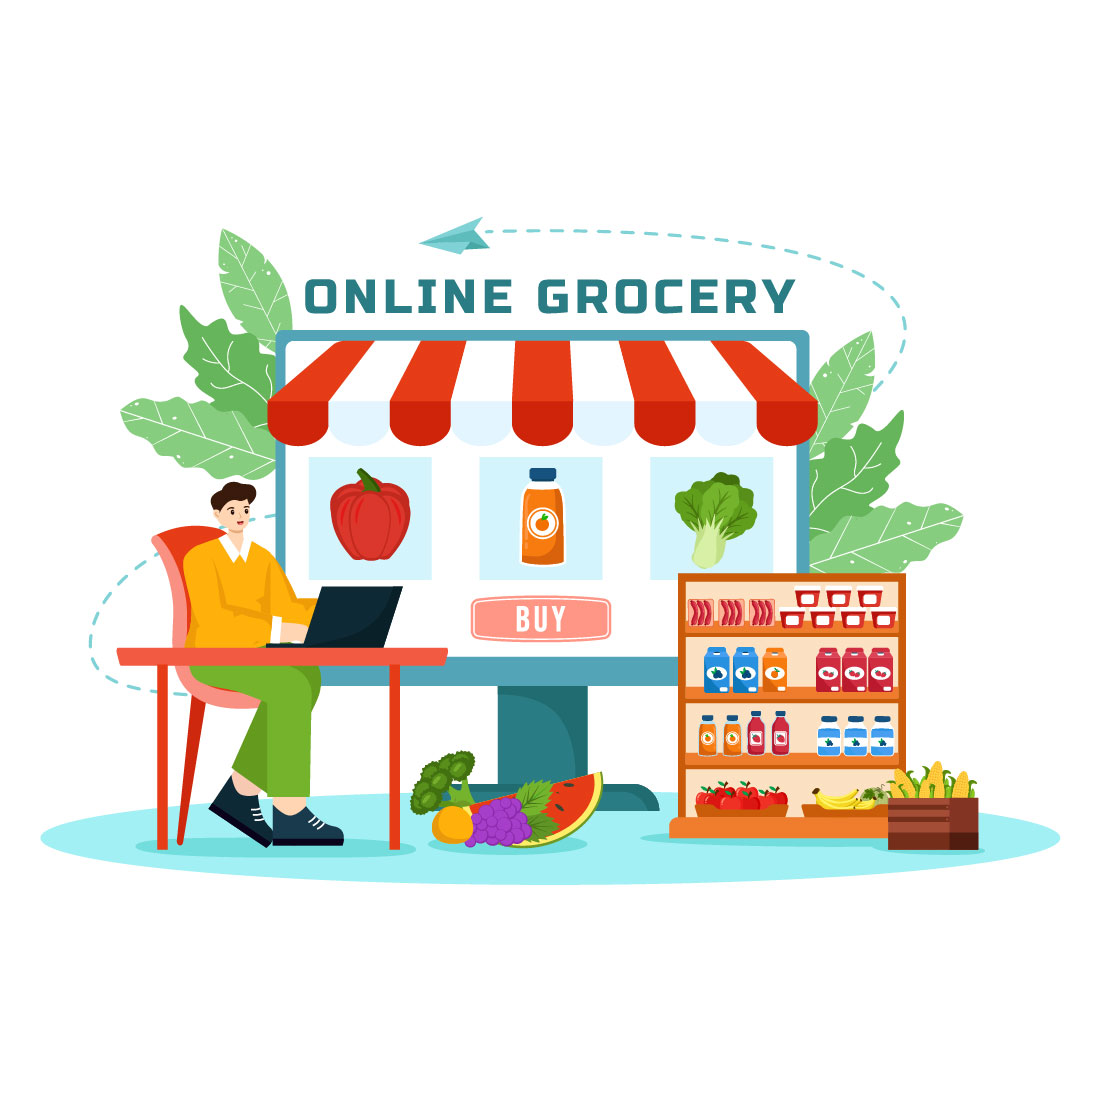 9 Online Grocery Store Illustration cover image.